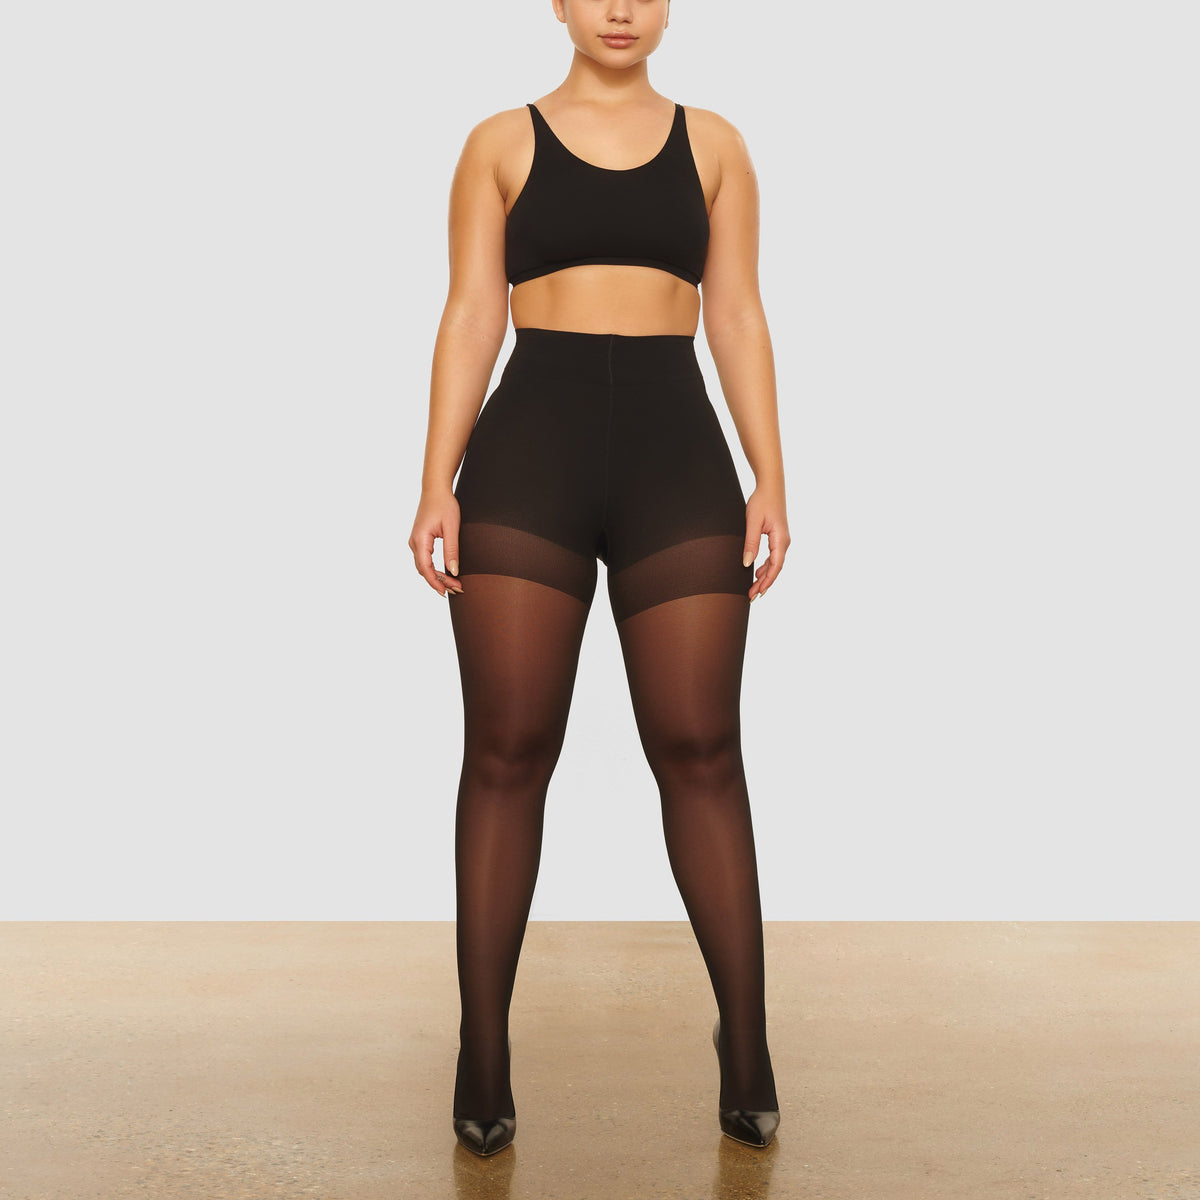 Statement tights are here to stay! Shop the best styles from